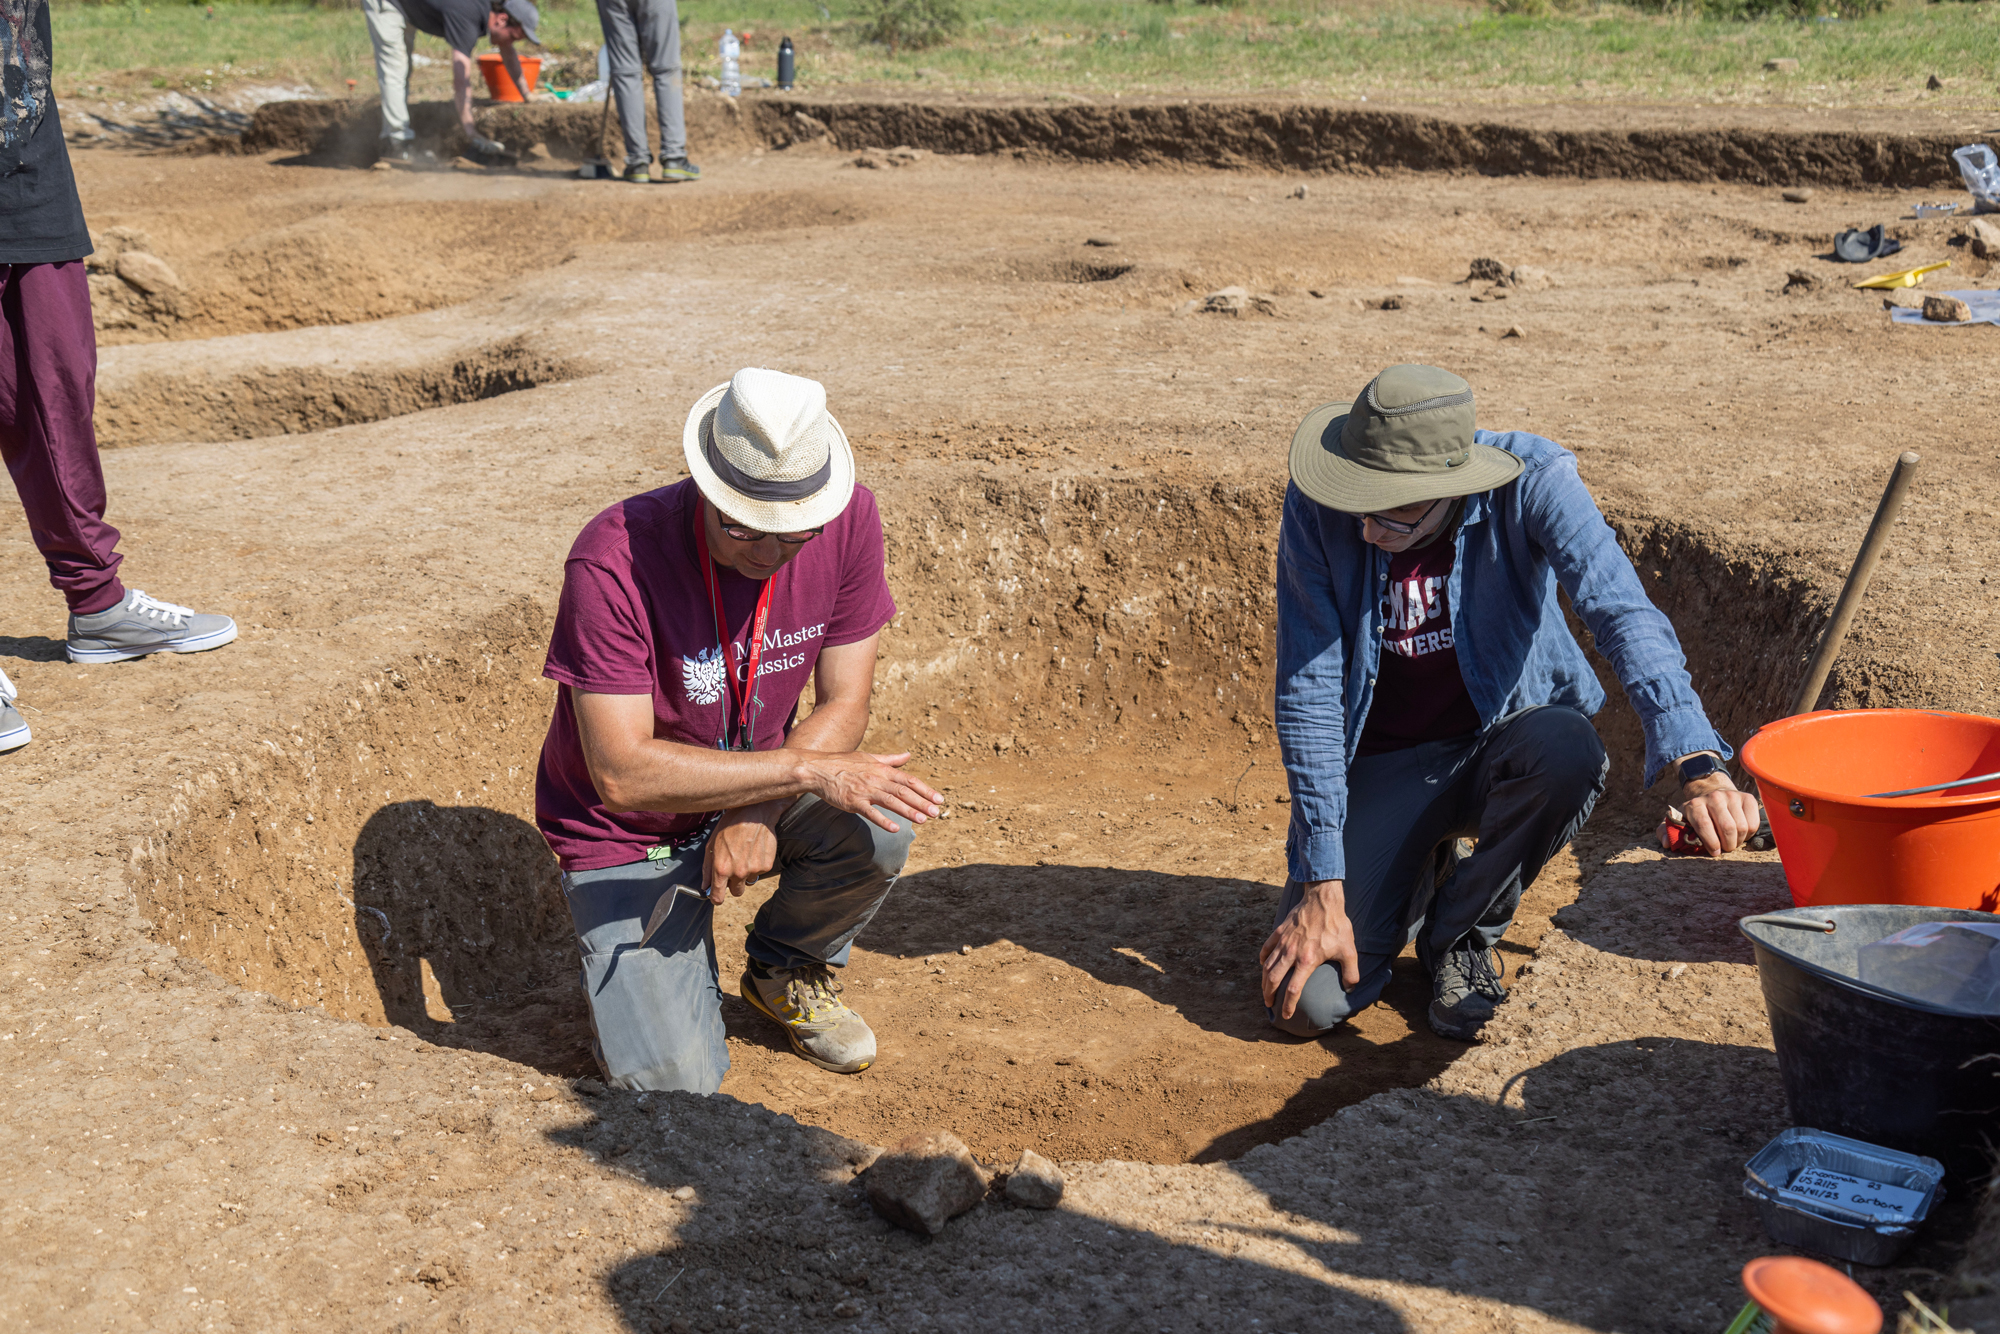 McMaster researcher Spencer Pope and a graduate student crouch down in an open pit to examine the dirt.